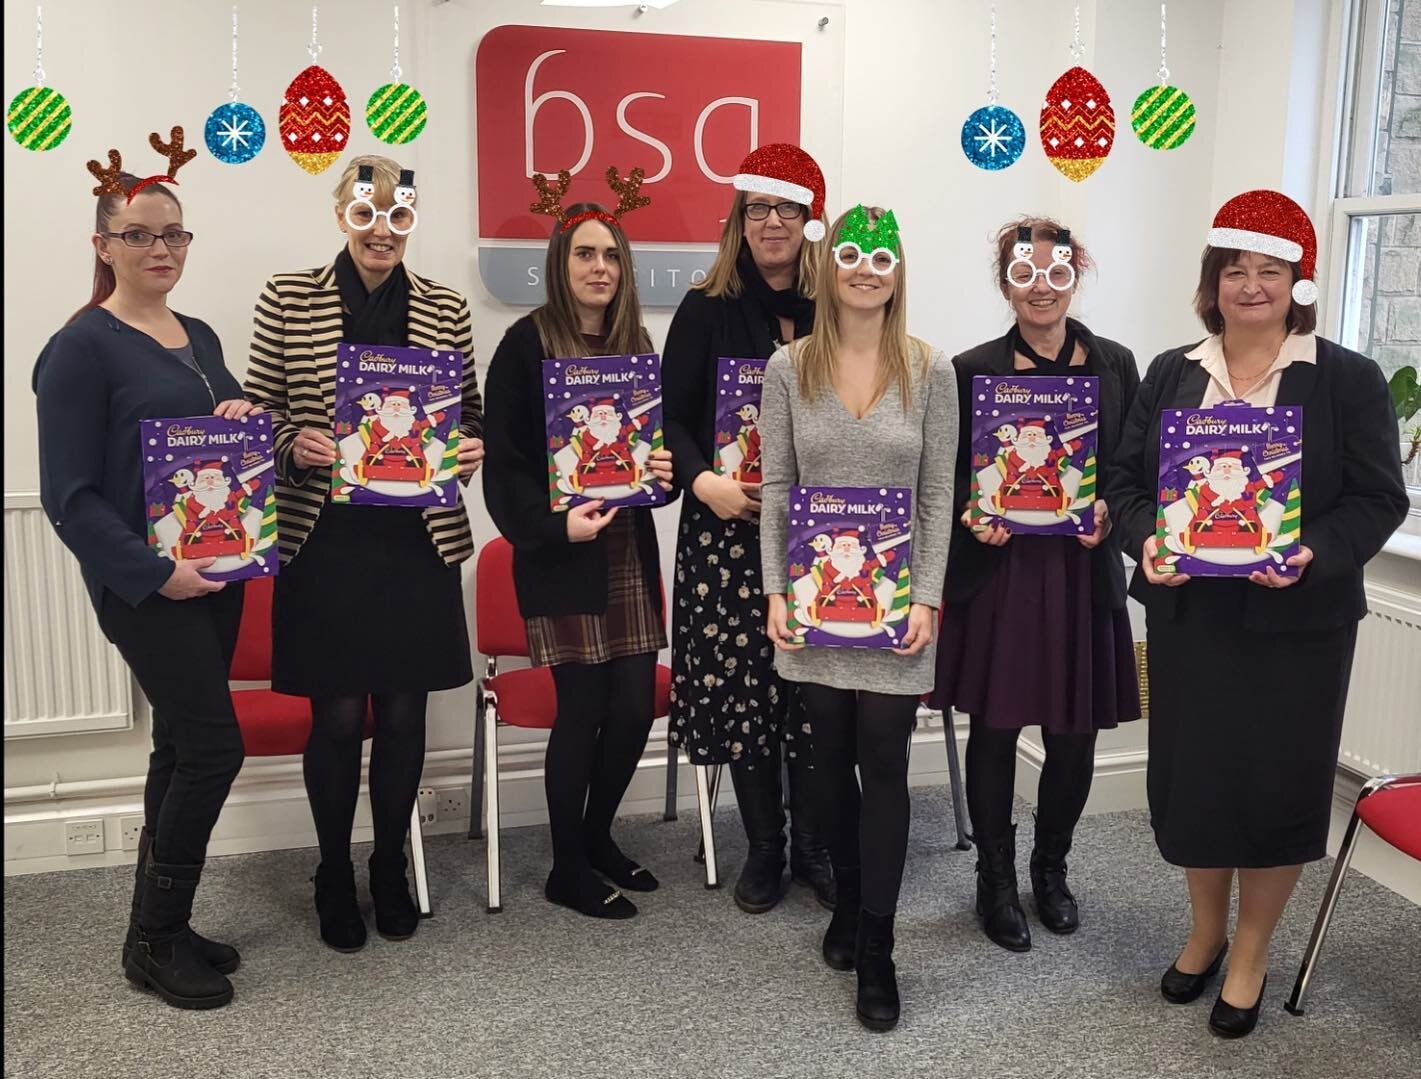 Our lovely elves have had a busy night leaving advent calendars out for us all.  A happy team, thank you Elves.